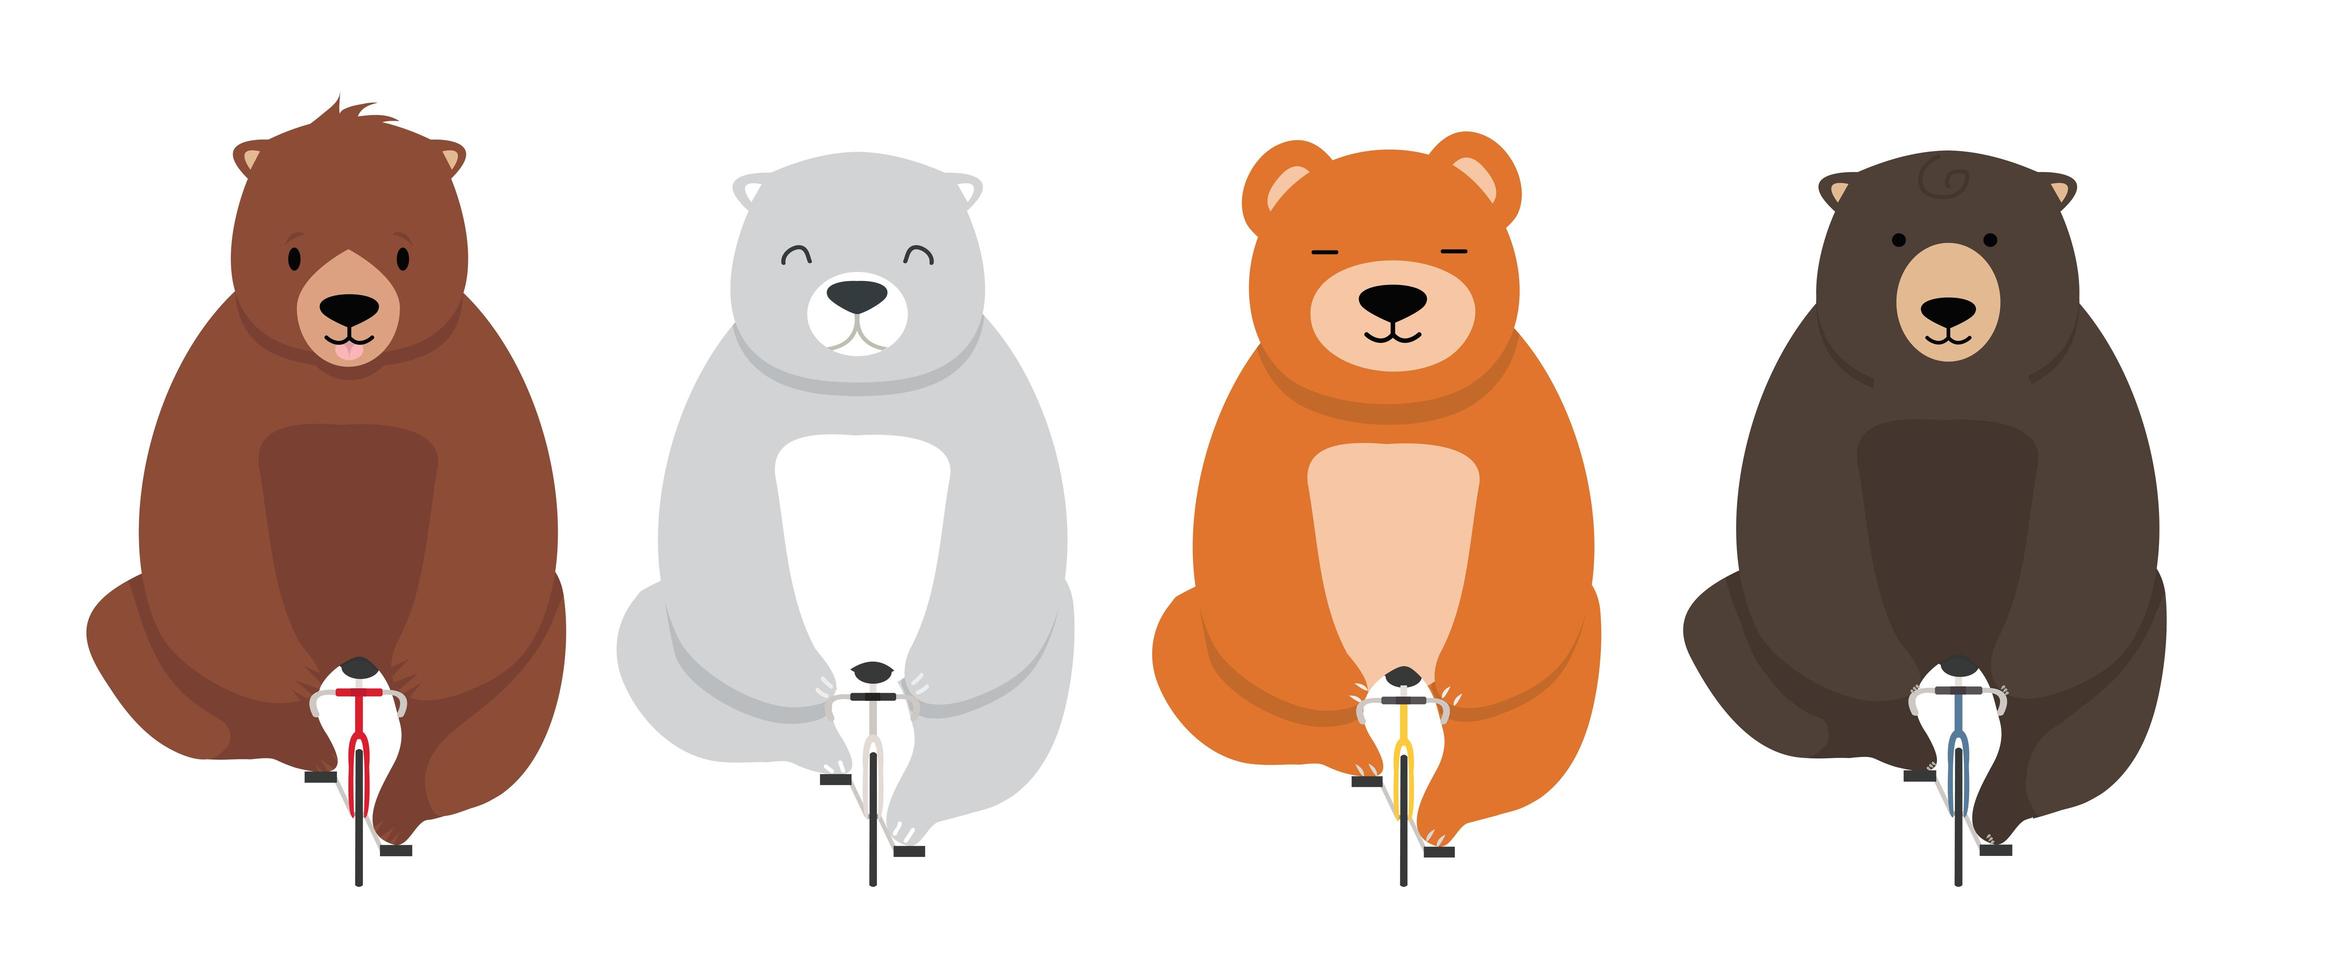 Sweet and cute bears on bicycles vector